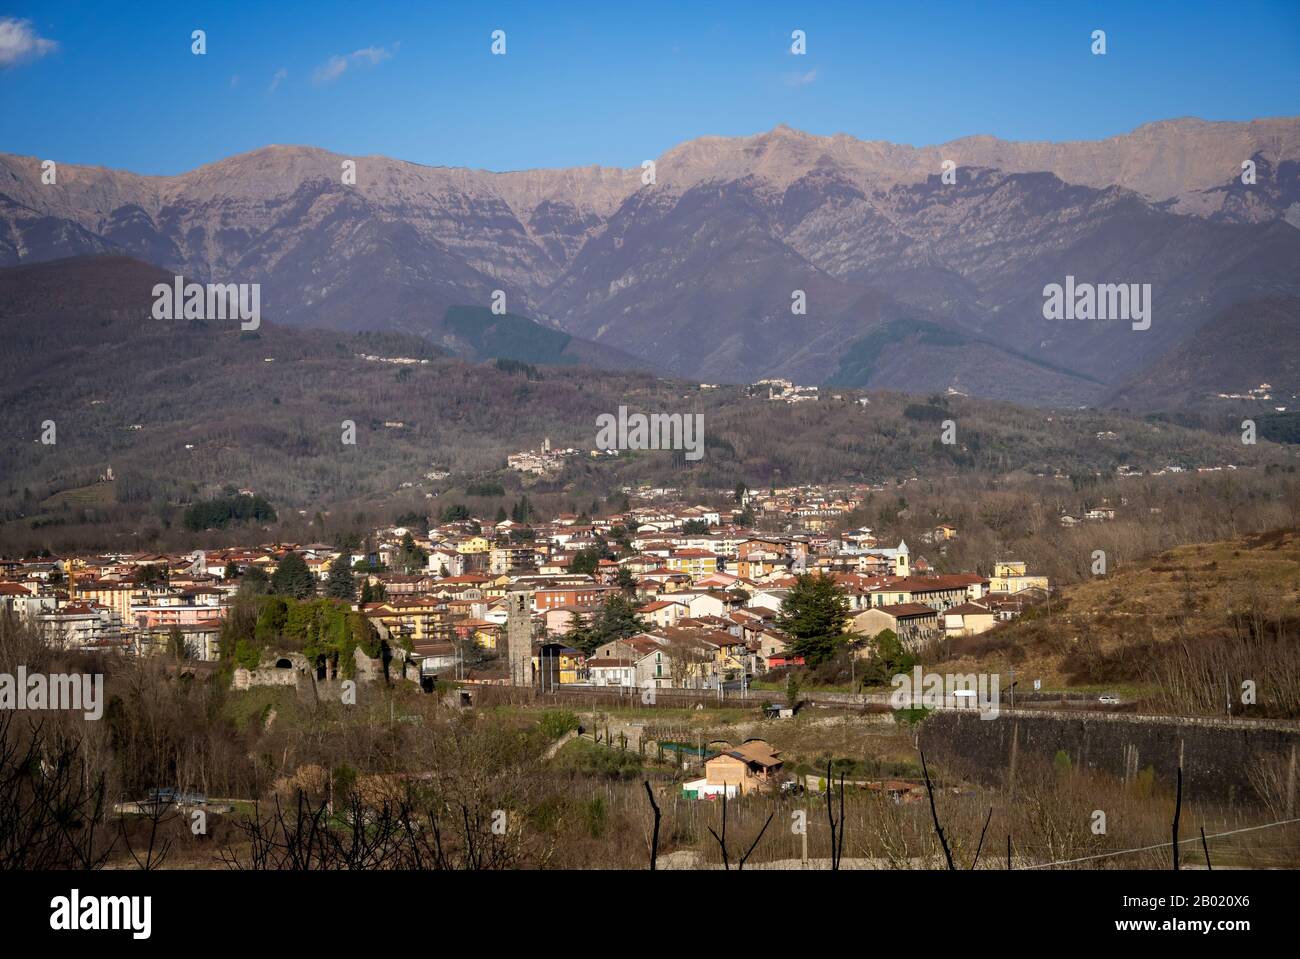 View over Villafranca in Lunigiana, north Tuscany, Italy. With apennine mountains behind. Castle ruins visible. Stock Photo